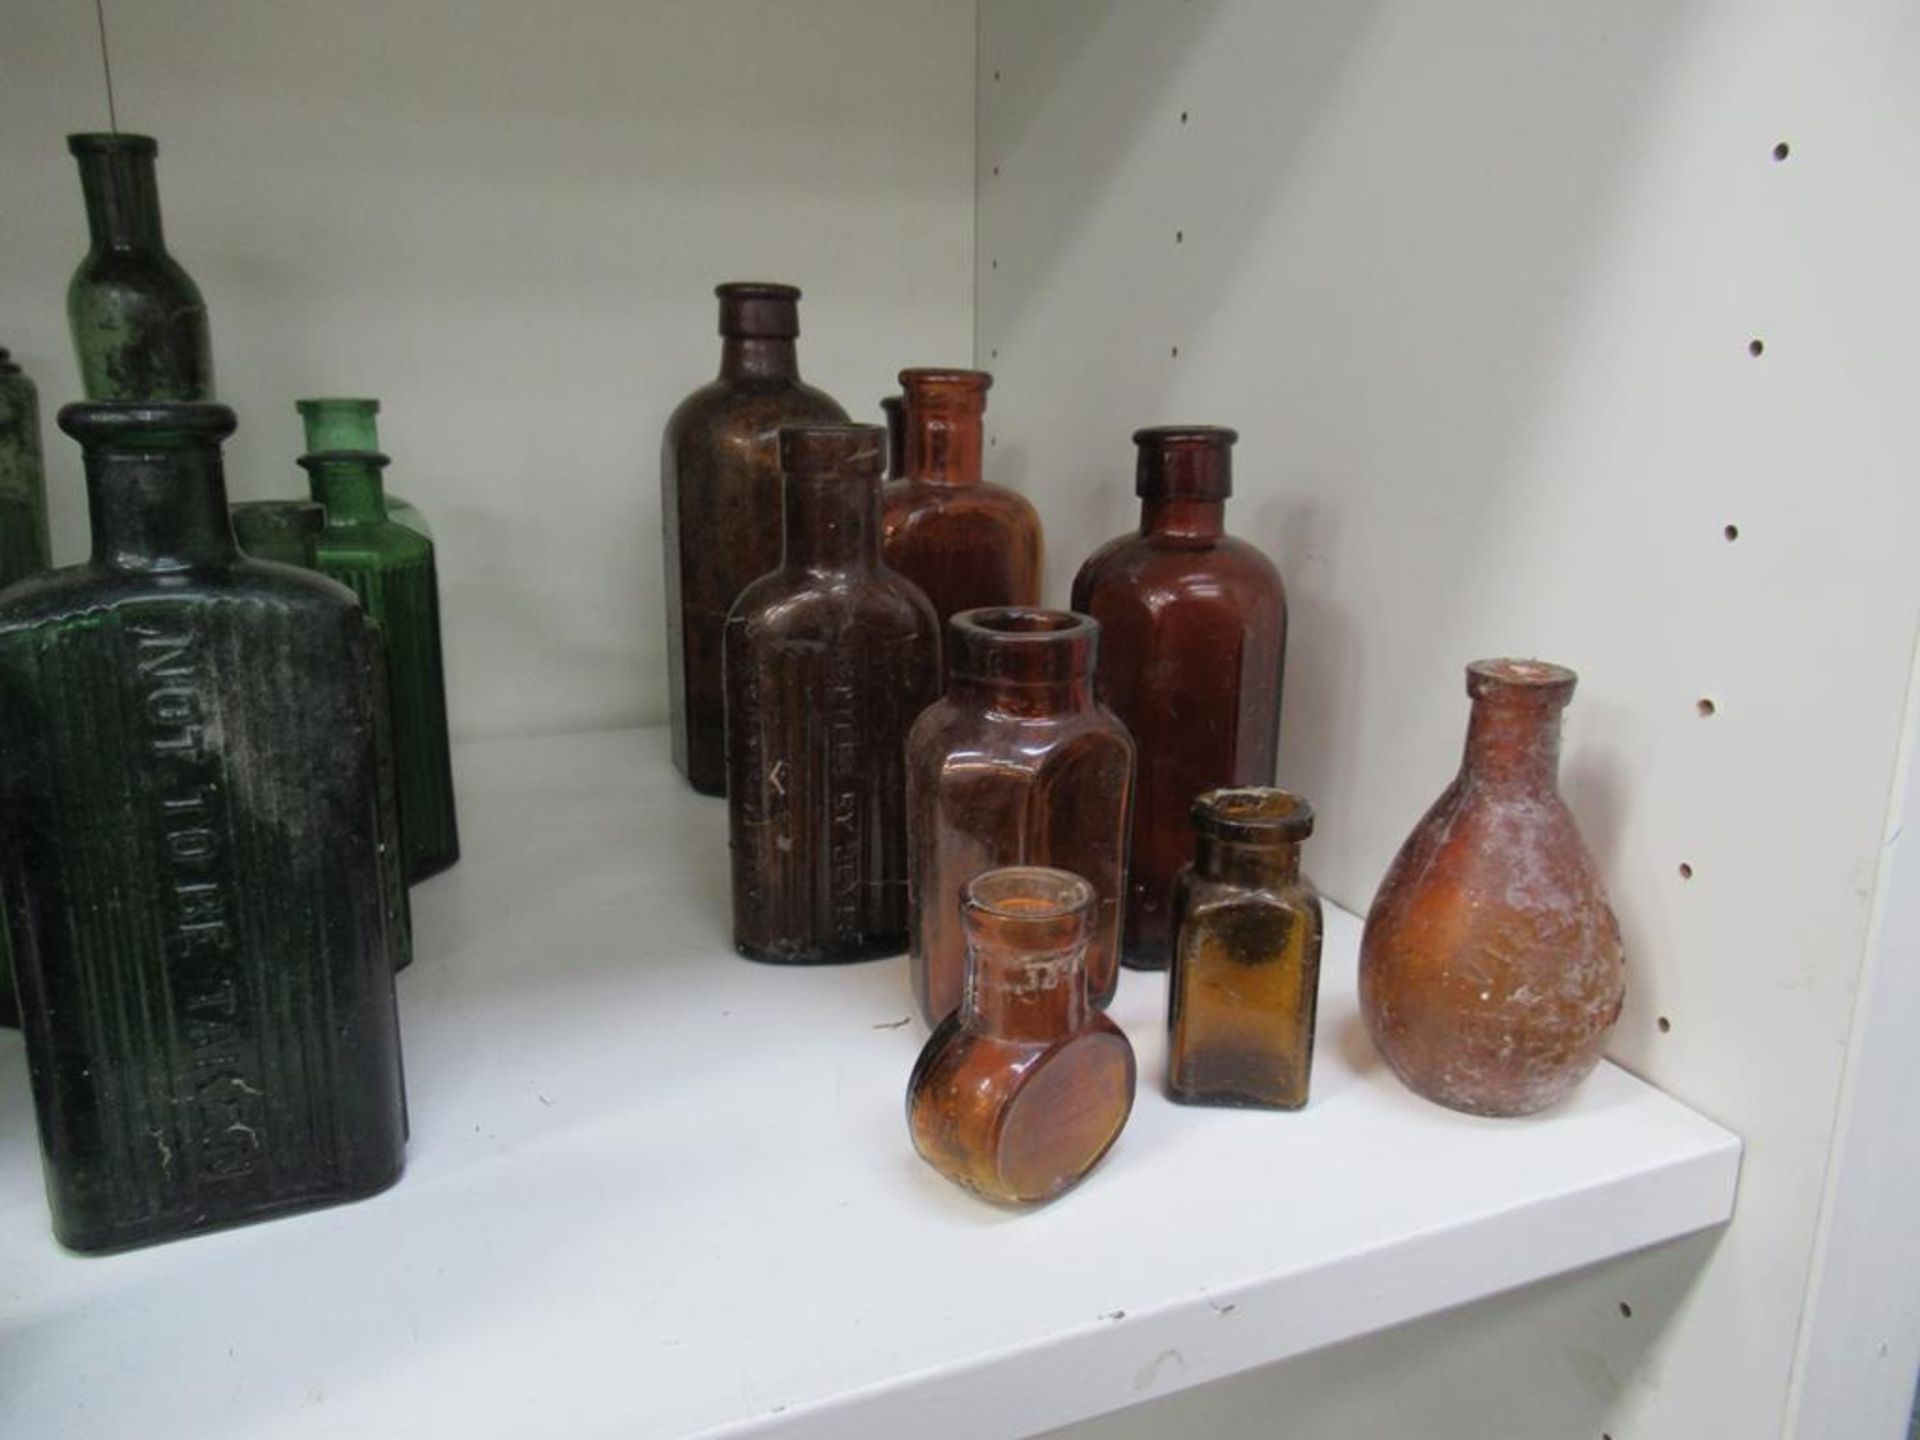 Shelf of Assorted Cobalt Green and Amber Bottles - many saying 'not to be taken' - Image 4 of 4